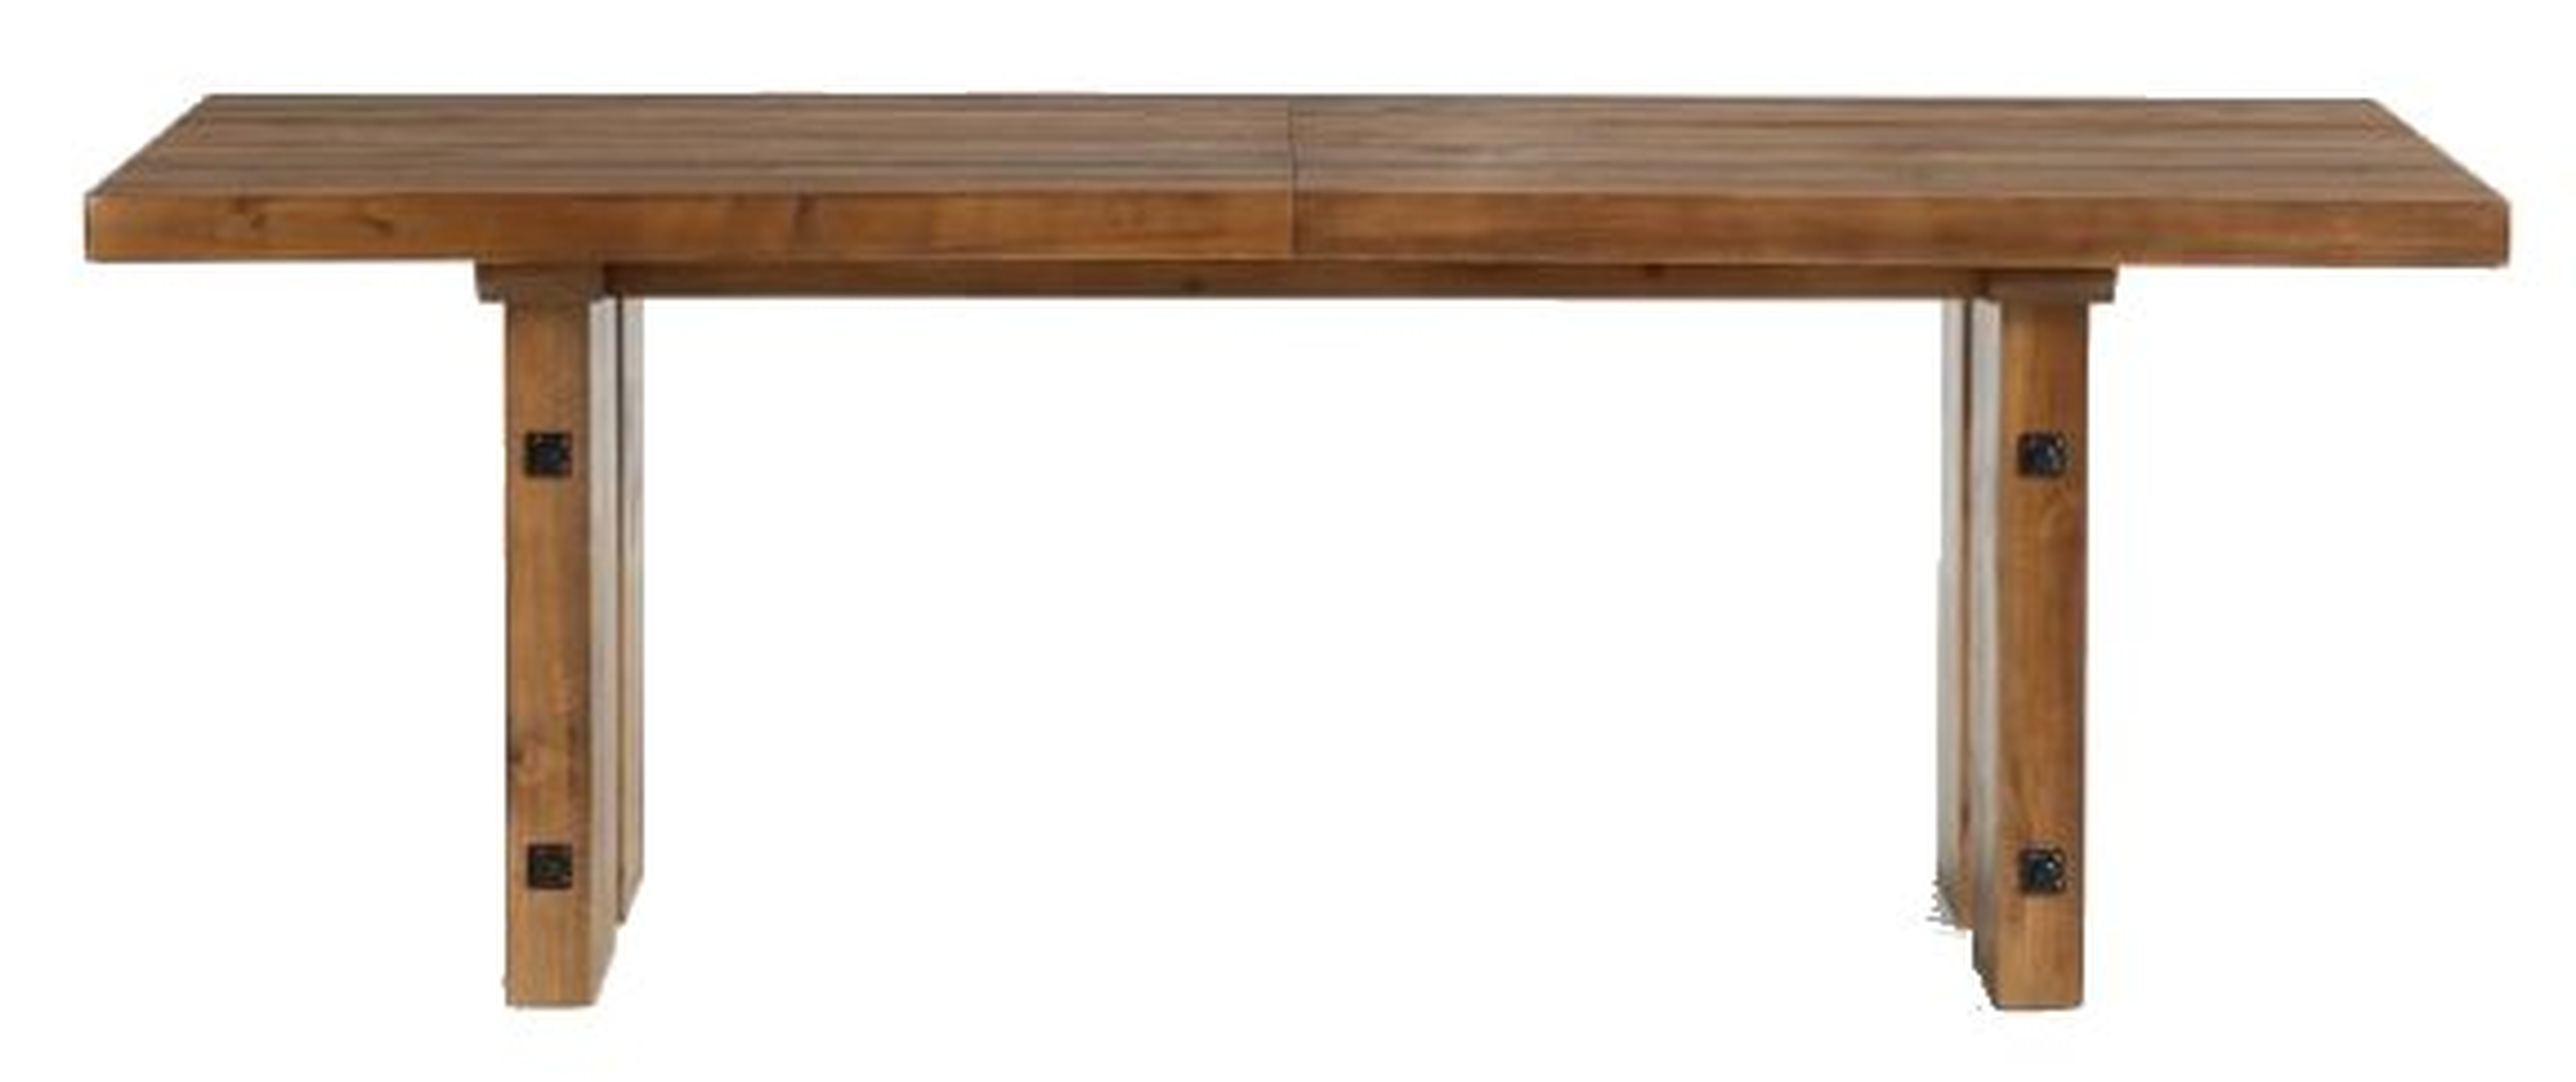 North Reclaimed Wood Extending Dining Table - Pottery Barn